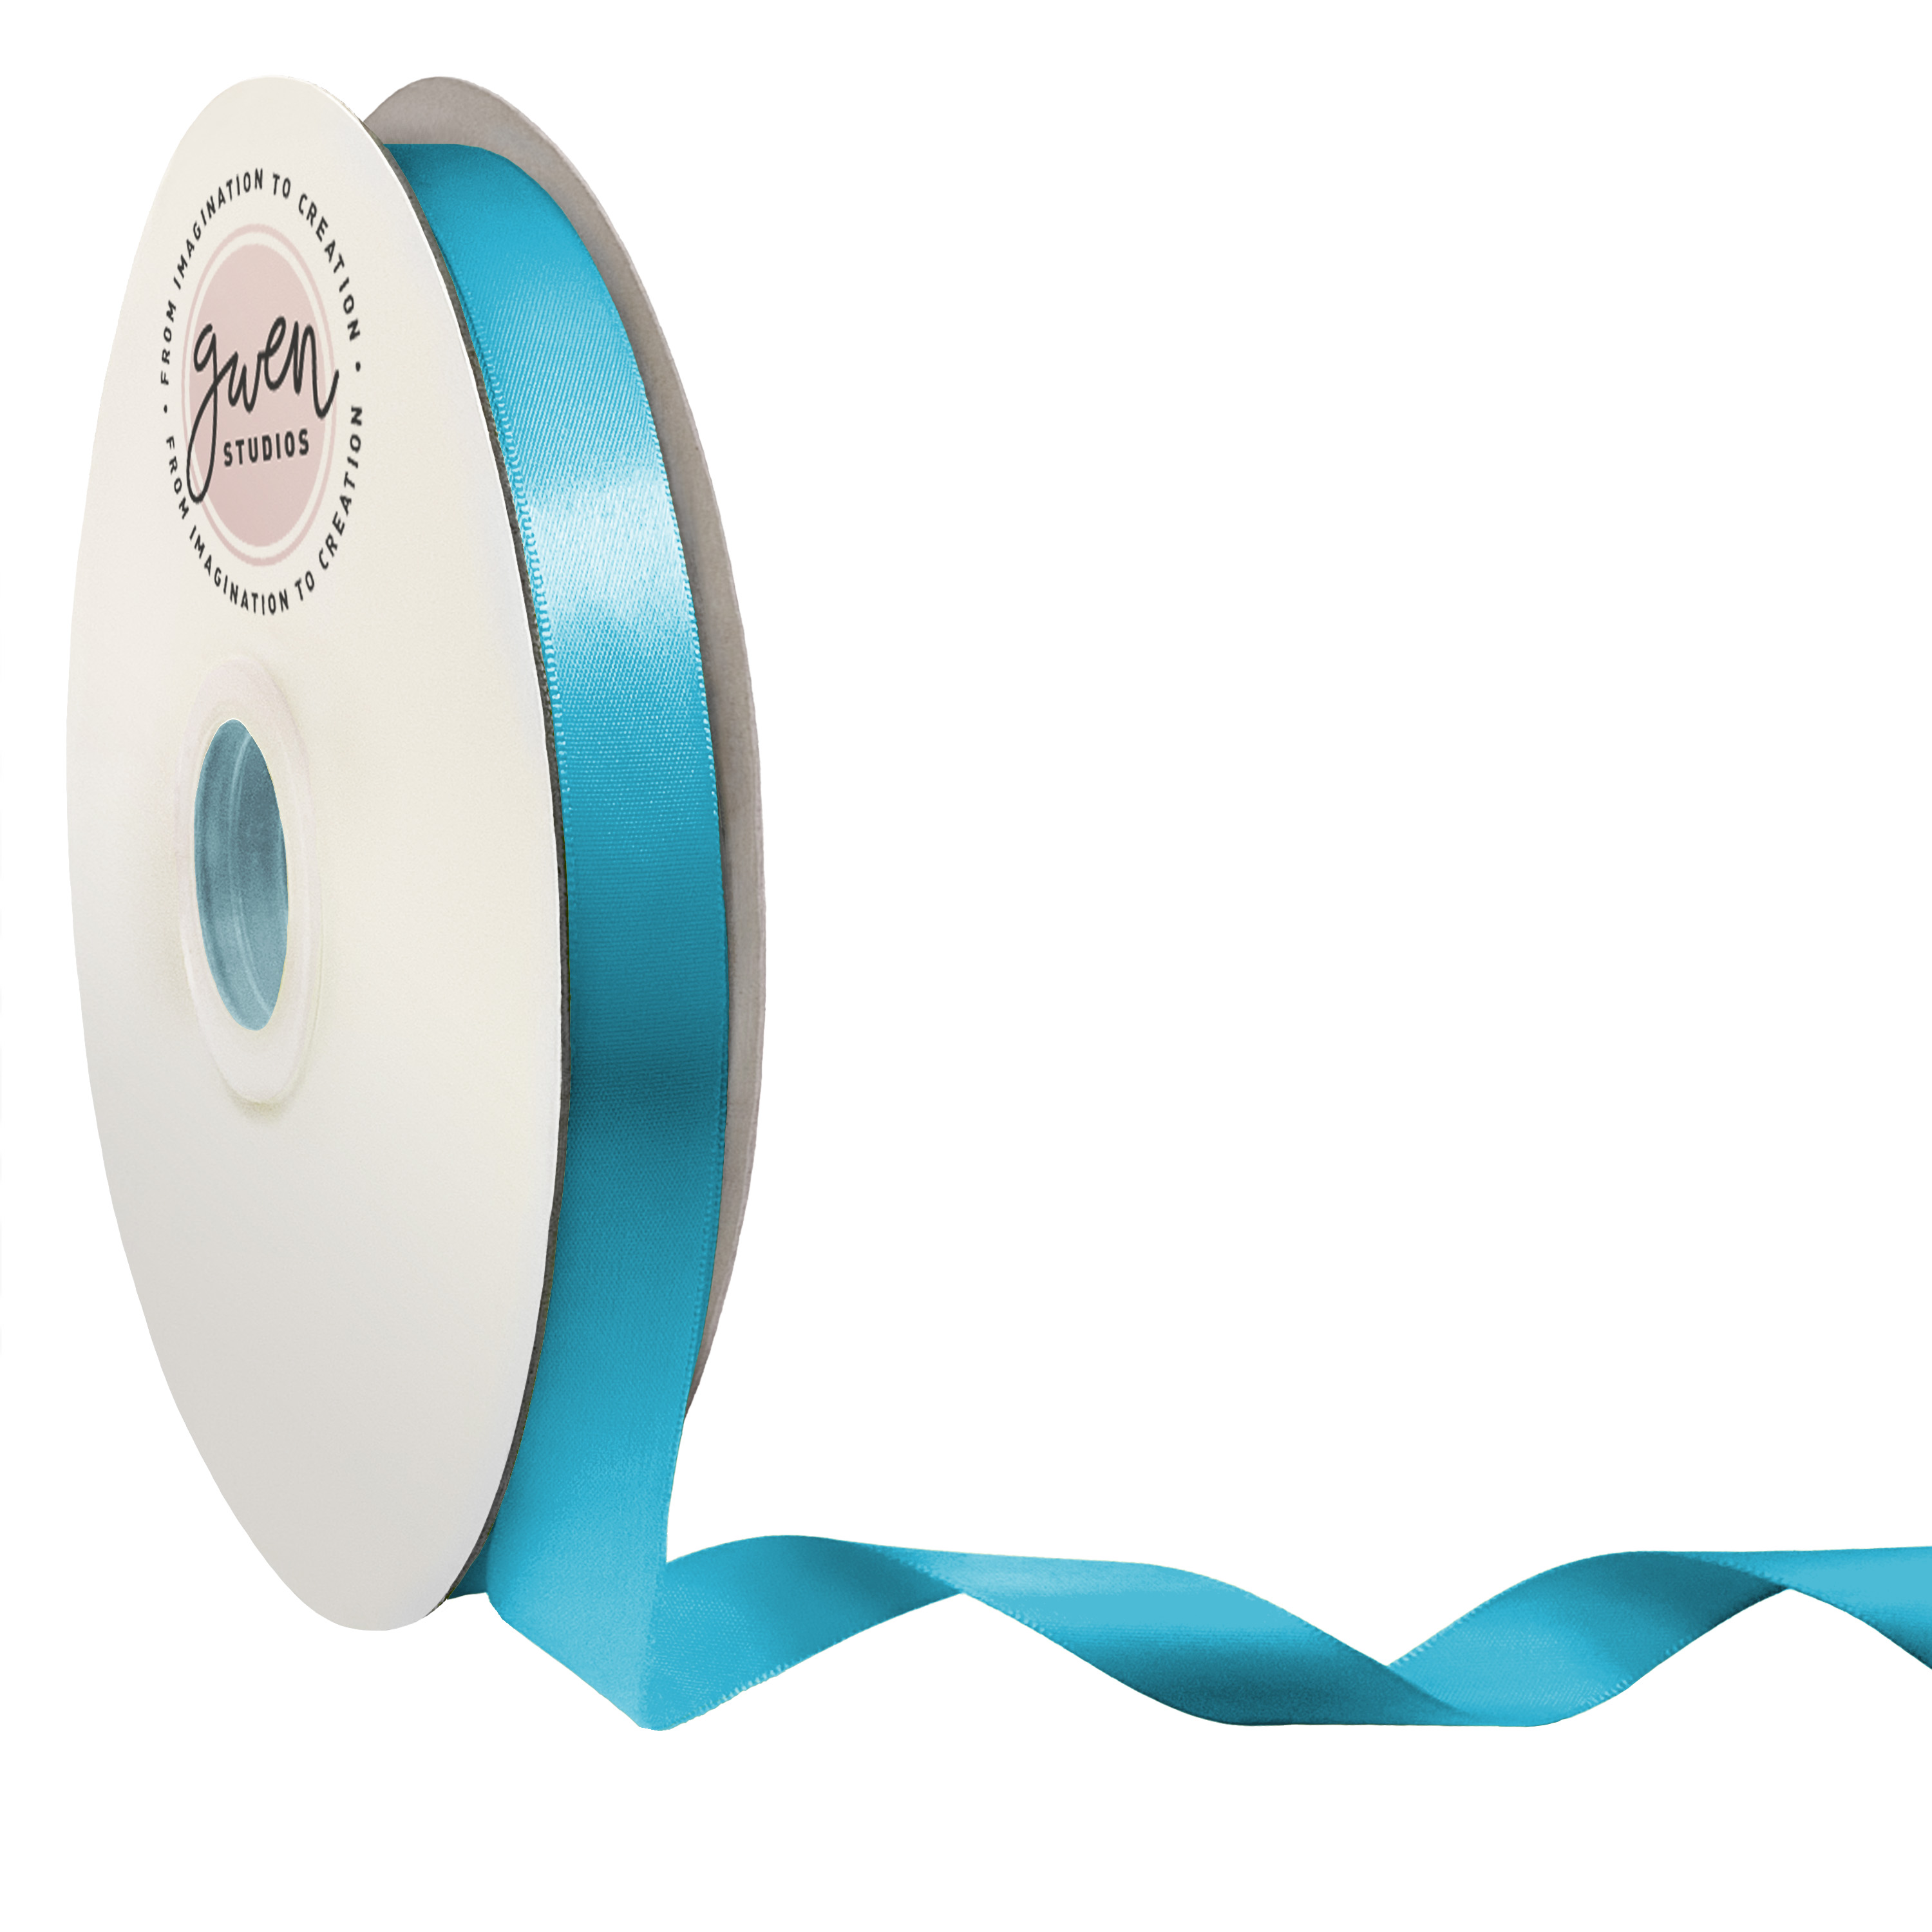 Turquoise Double Faced Satin Ribbon for Crafts, 5/8 x 100 Yards by Gwen  Studios